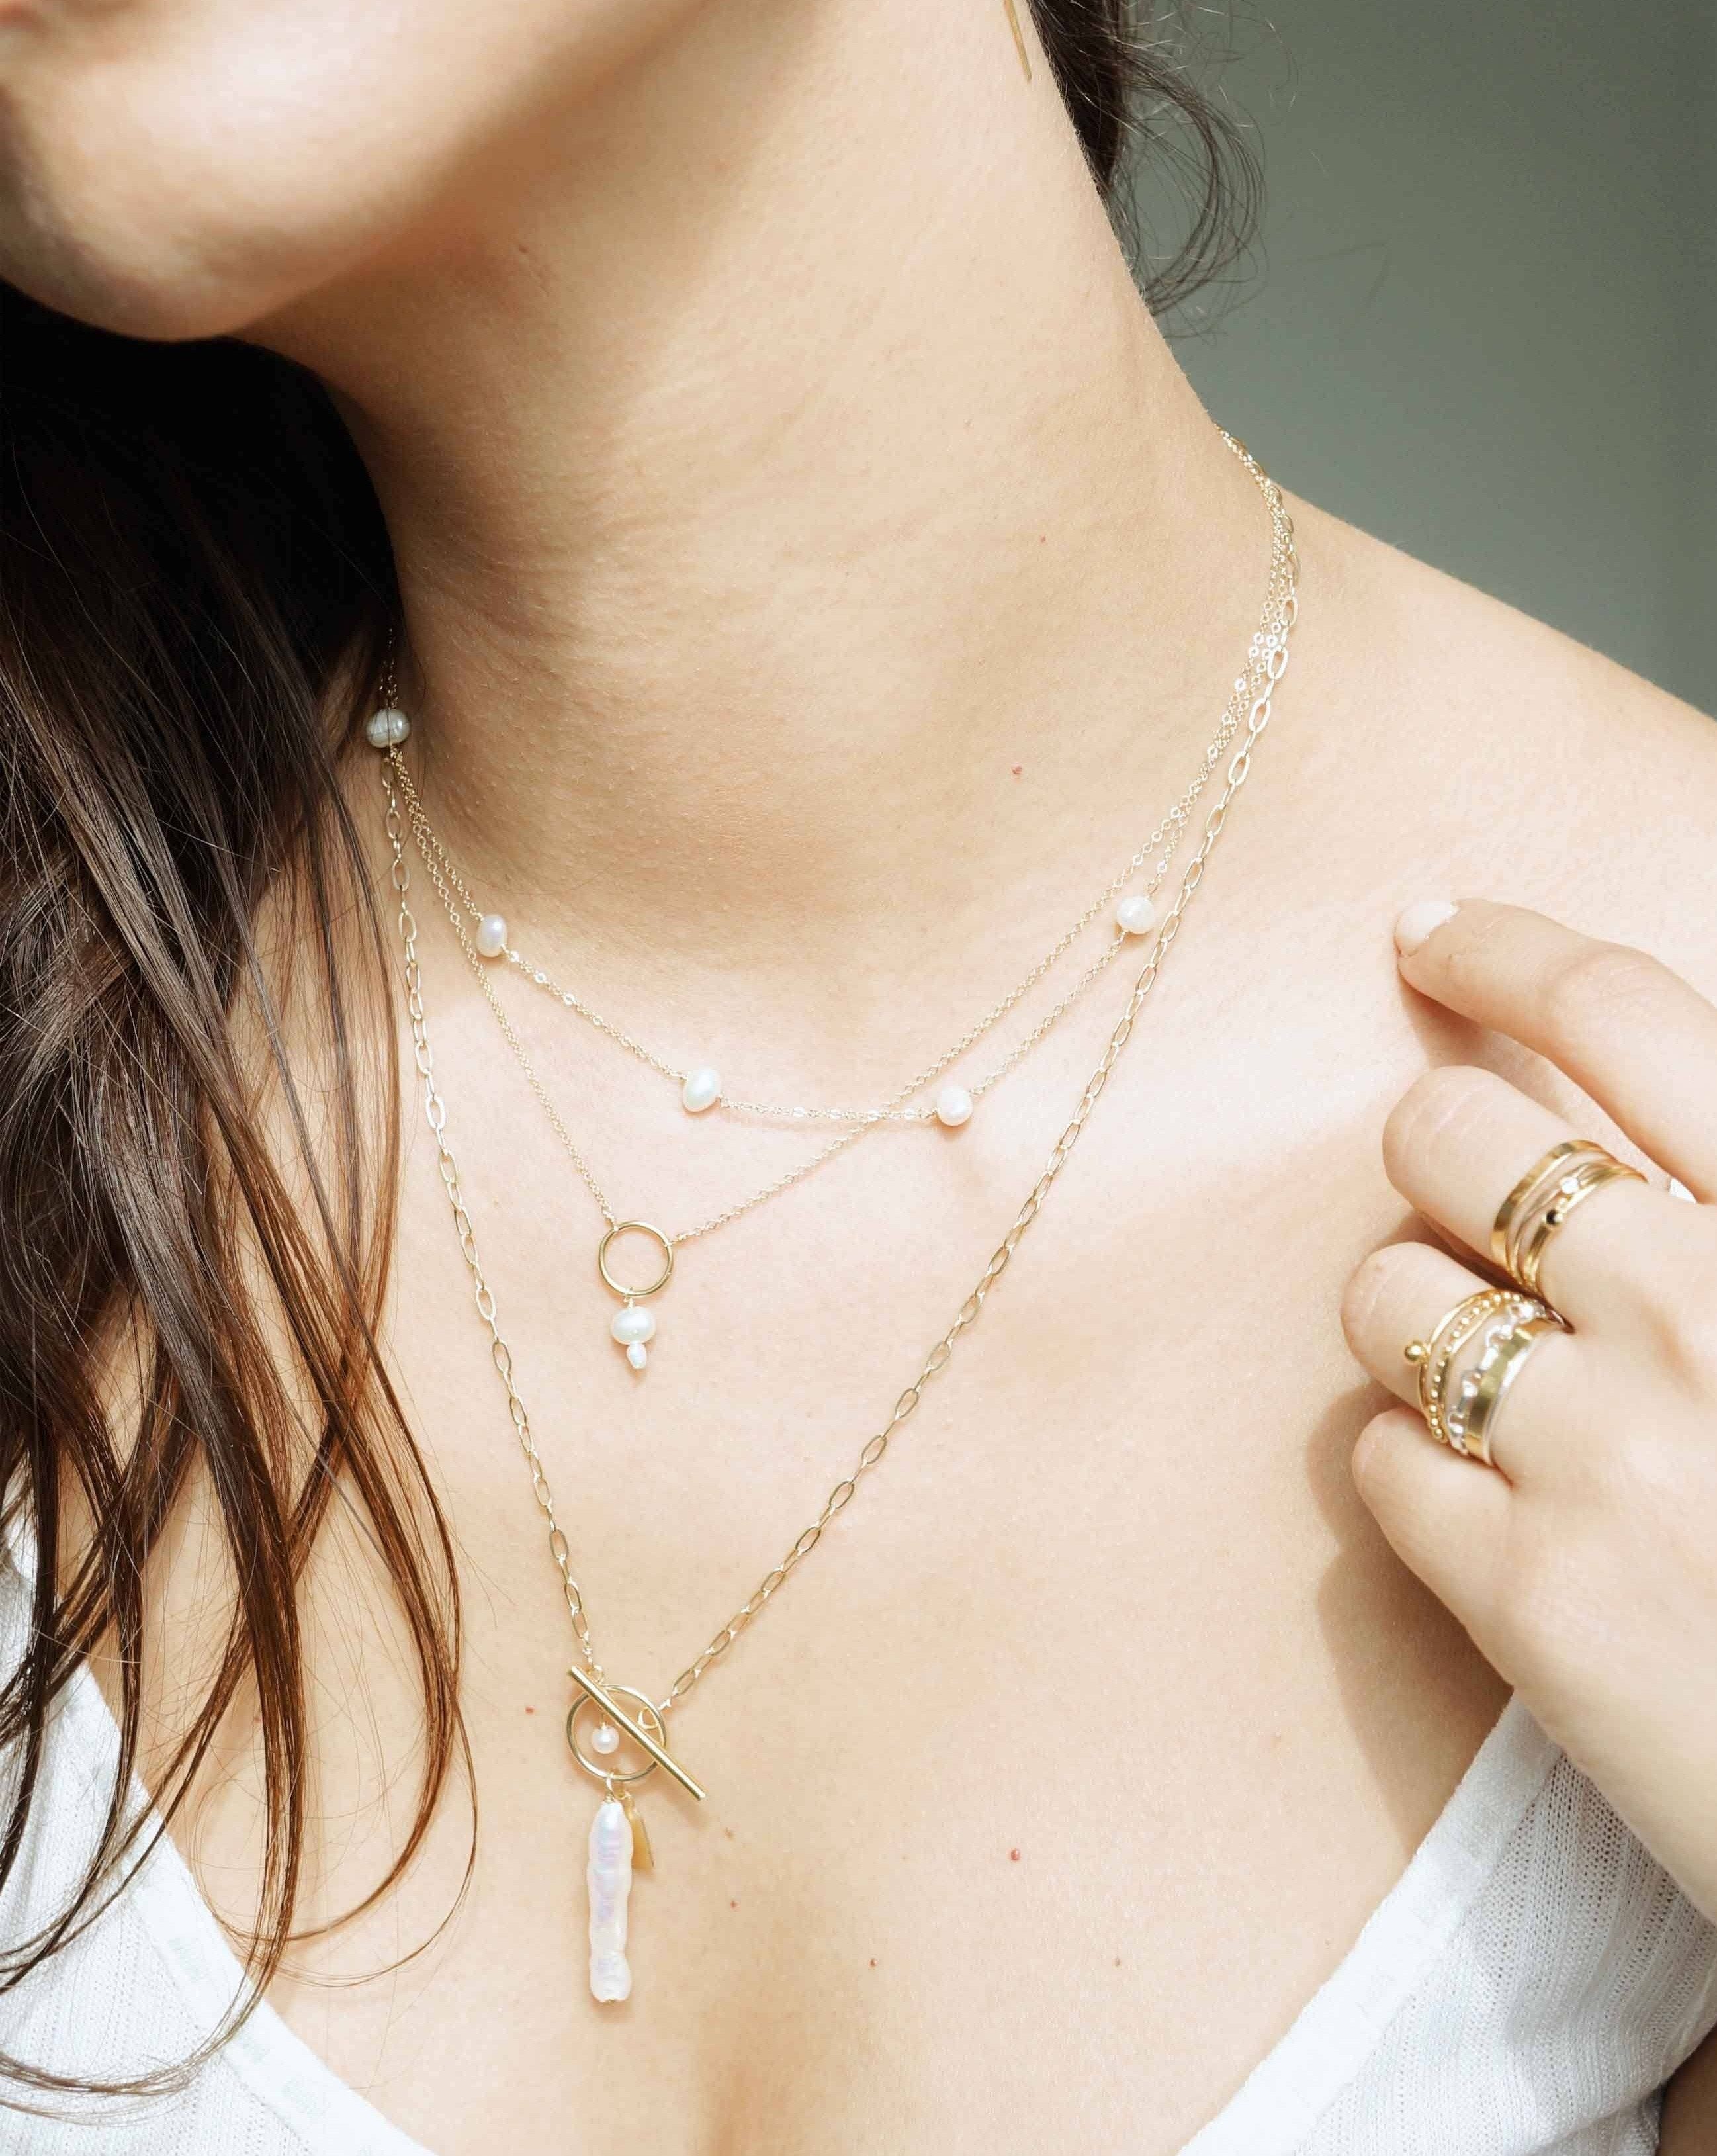 Lahela Necklace by KOZAKH. A 16 to 18 inch adjustable length necklace, crafted in 14K Gold Filled, featuring a 4-5mm White irregular Pearl and a 3-4mm white freshwater Pearl.